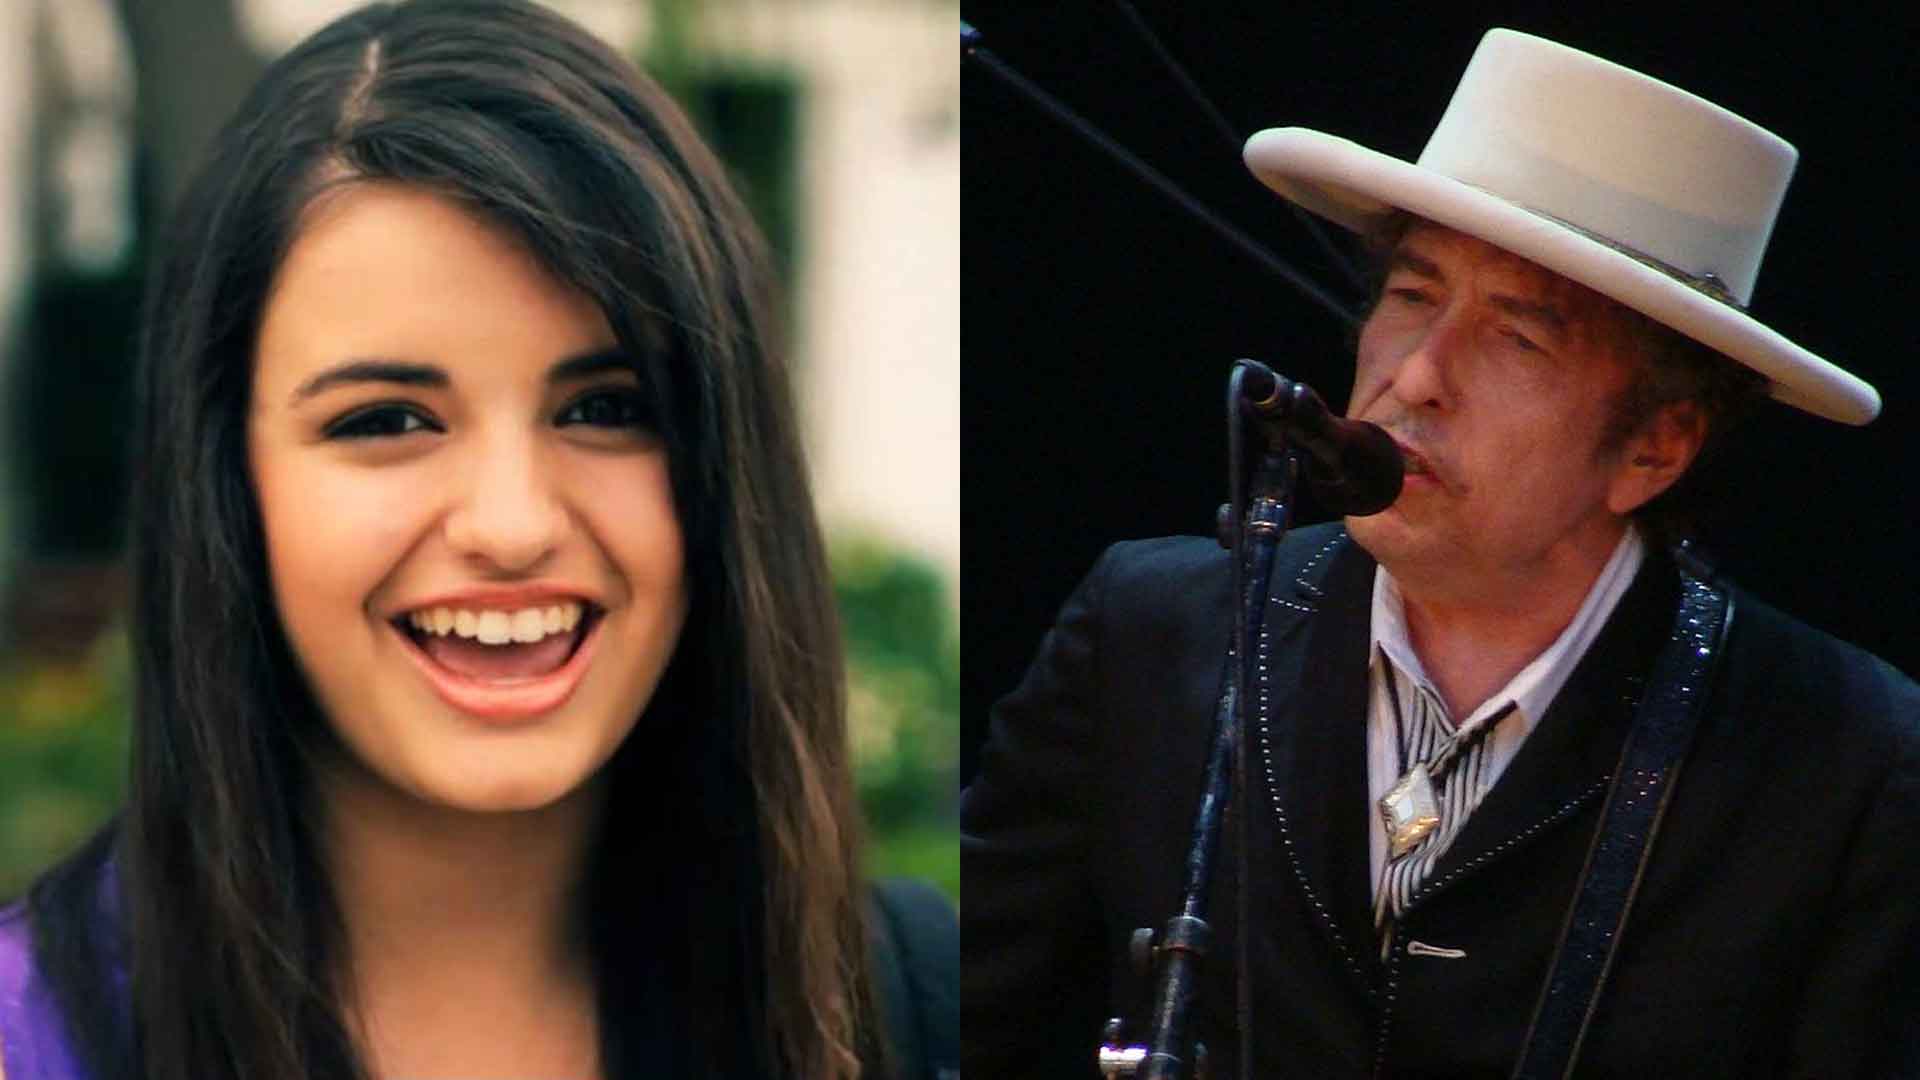 Did Bob Dylan Record A Cover Version Of Rebecca Black's Viral Hit Song, "Friday"?